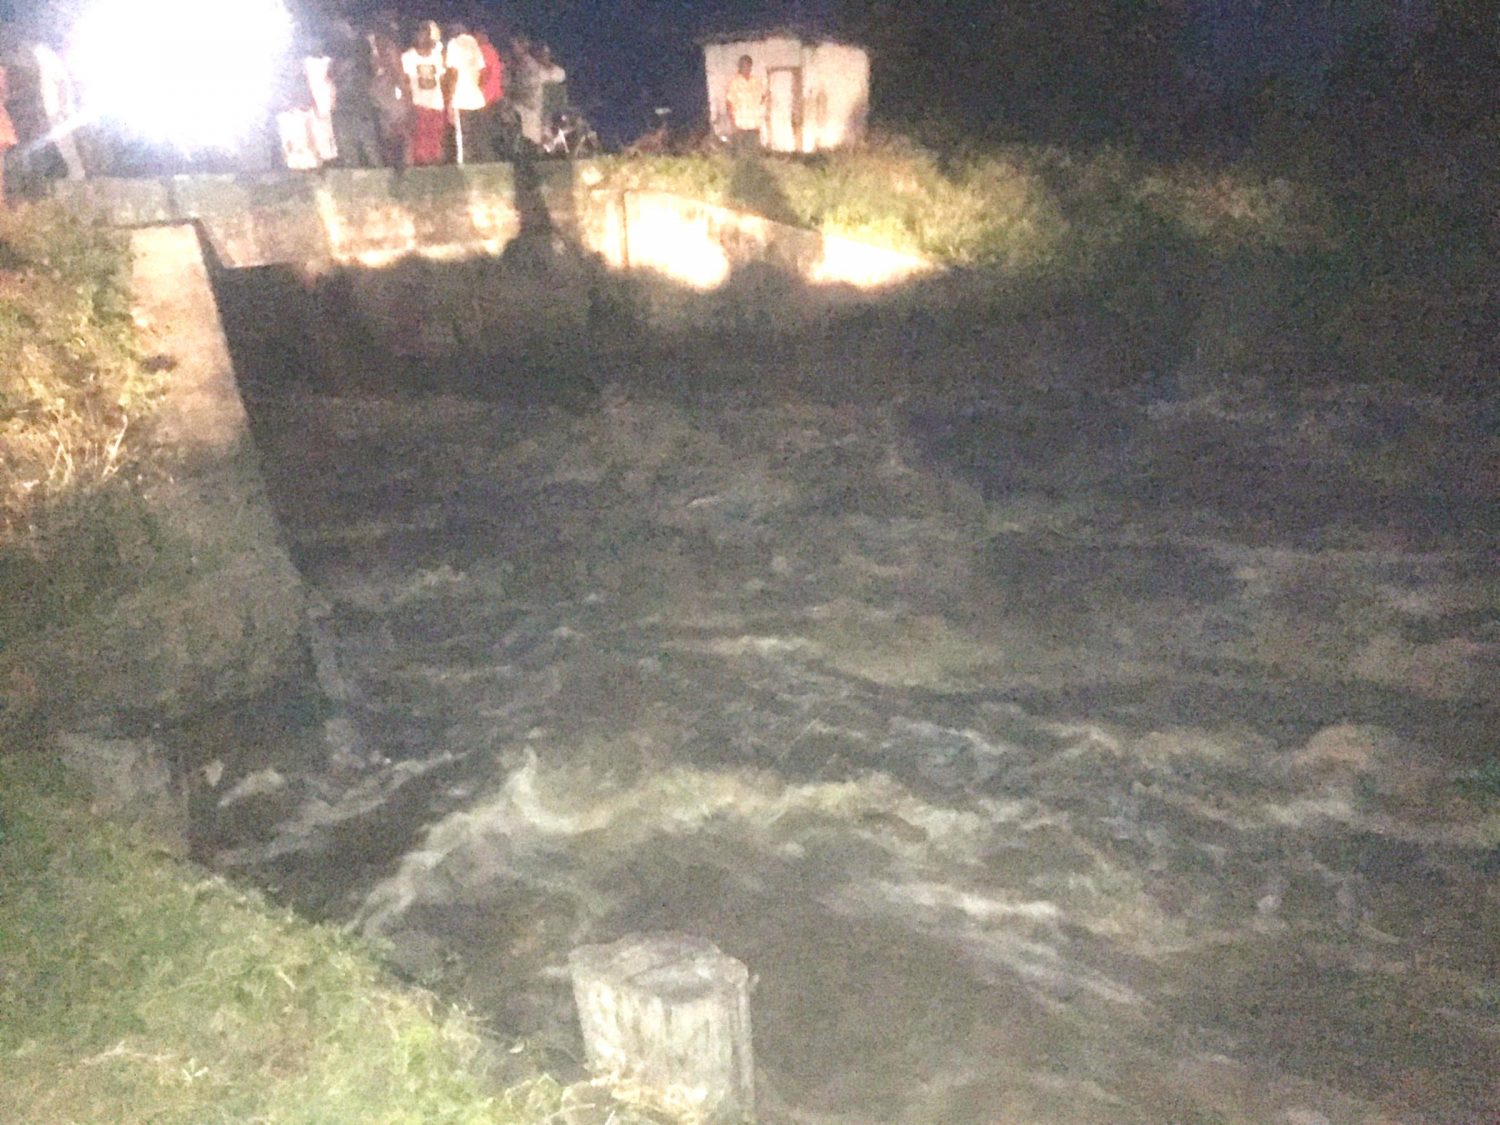 Water gushing inland from the Atlantic Ocean last evening after the sluice door at the De William, West Coast Demerara, Koker  ws destroyed by the Atlantic current (Dhanash Ramroop photo)